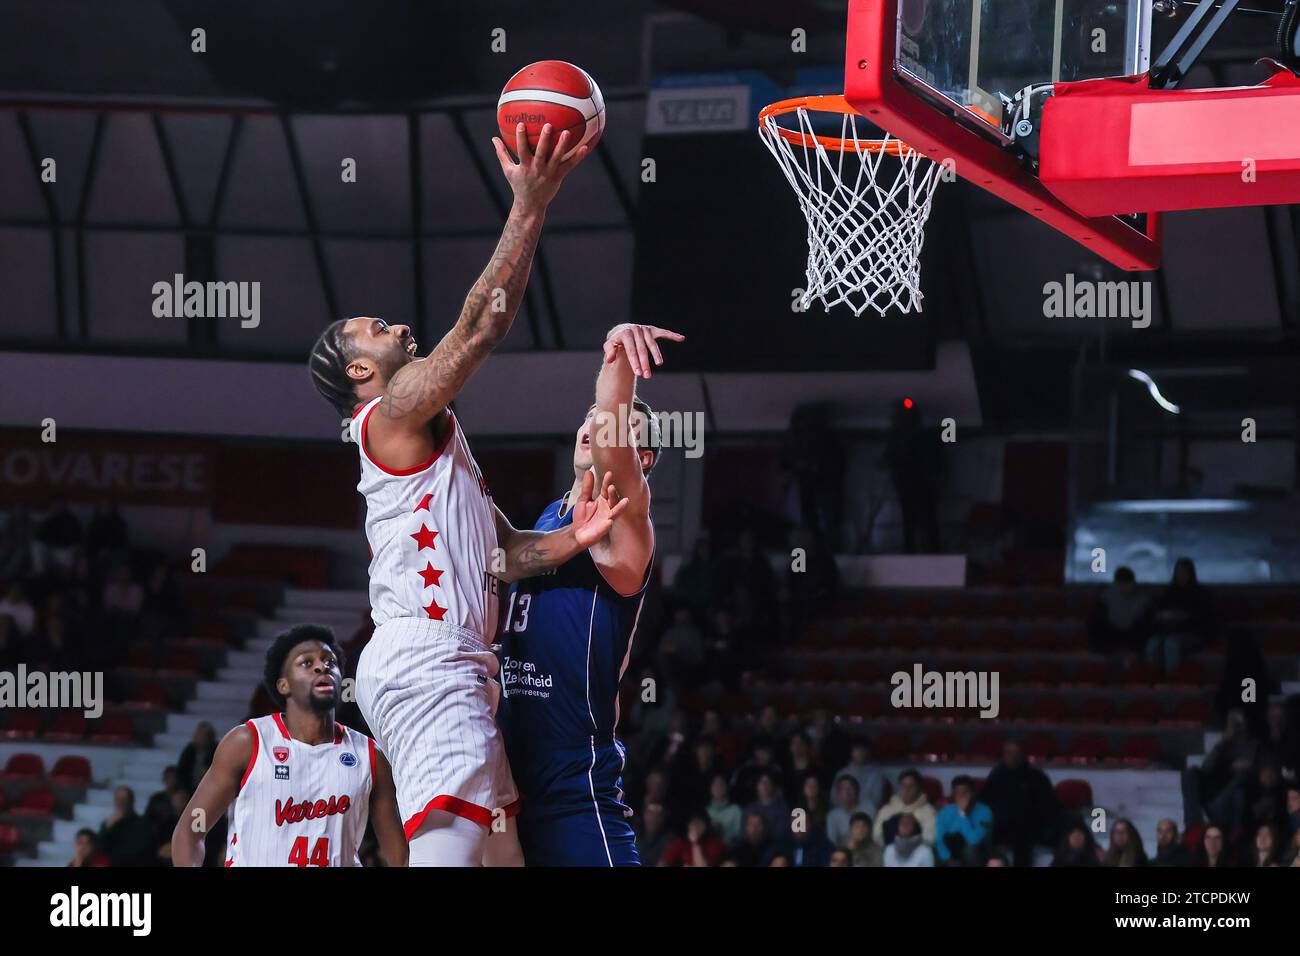 Varese, Italy. 13th Dec, 2023. James Young #1 of Itelyum Varese (L) and Luuk Van Bree #13 of ZZ Leiden (R) seen in action during the FIBA Europe Cup 2023/24 Second Round Group N game between Itelyum Varese and ZZ Leiden at Itelyum Arena. Final score; Itelyum Varese 79:82 ZZ Leiden. Credit: SOPA Images Limited/Alamy Live News Stock Photo